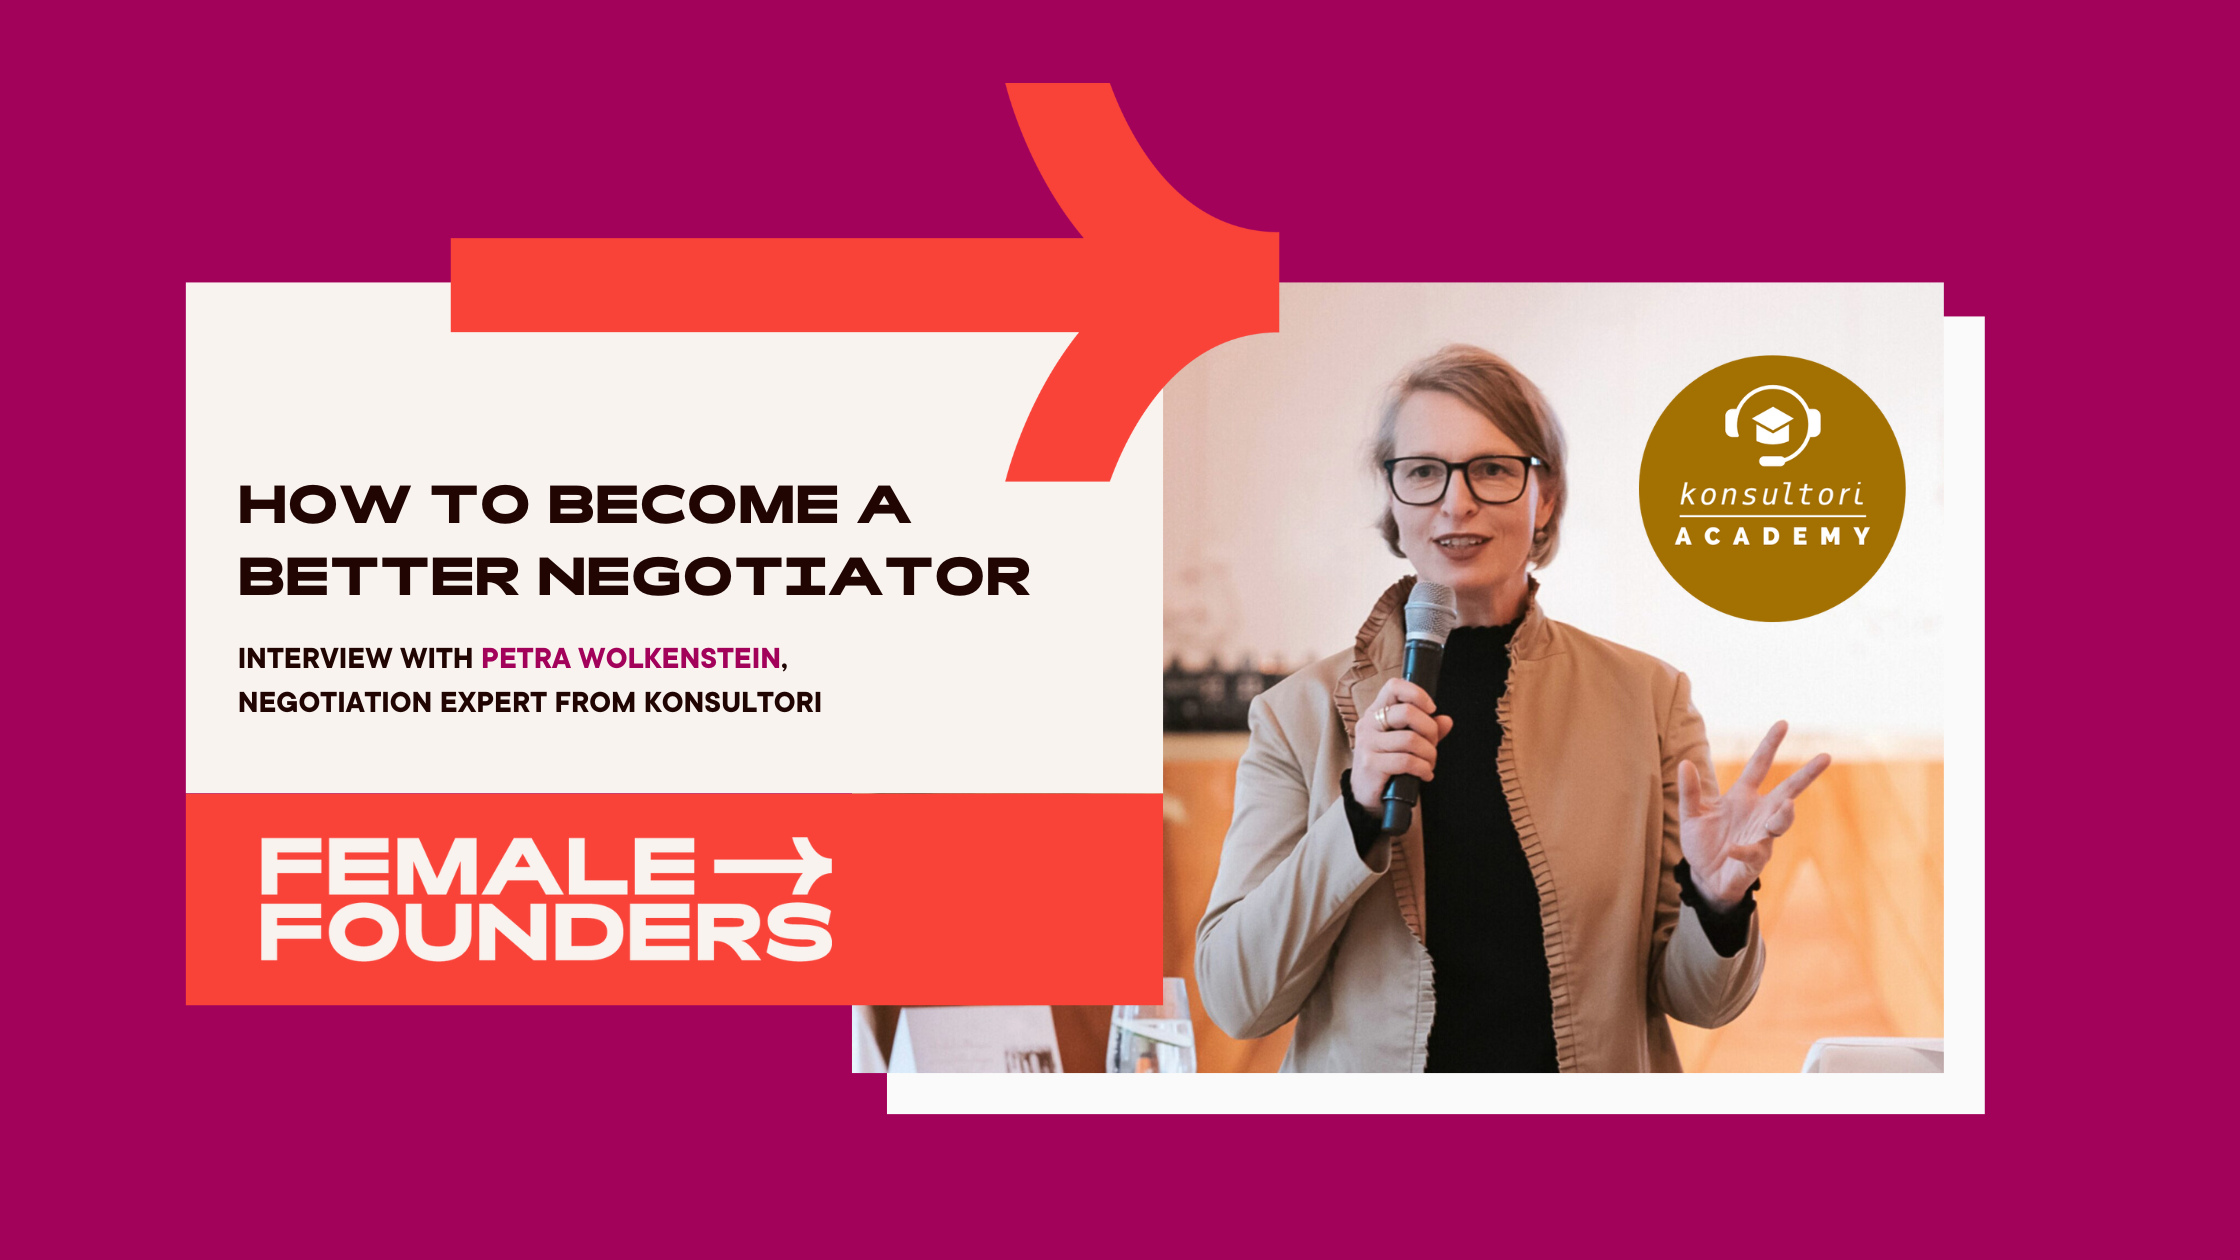 How to become a better negotiator